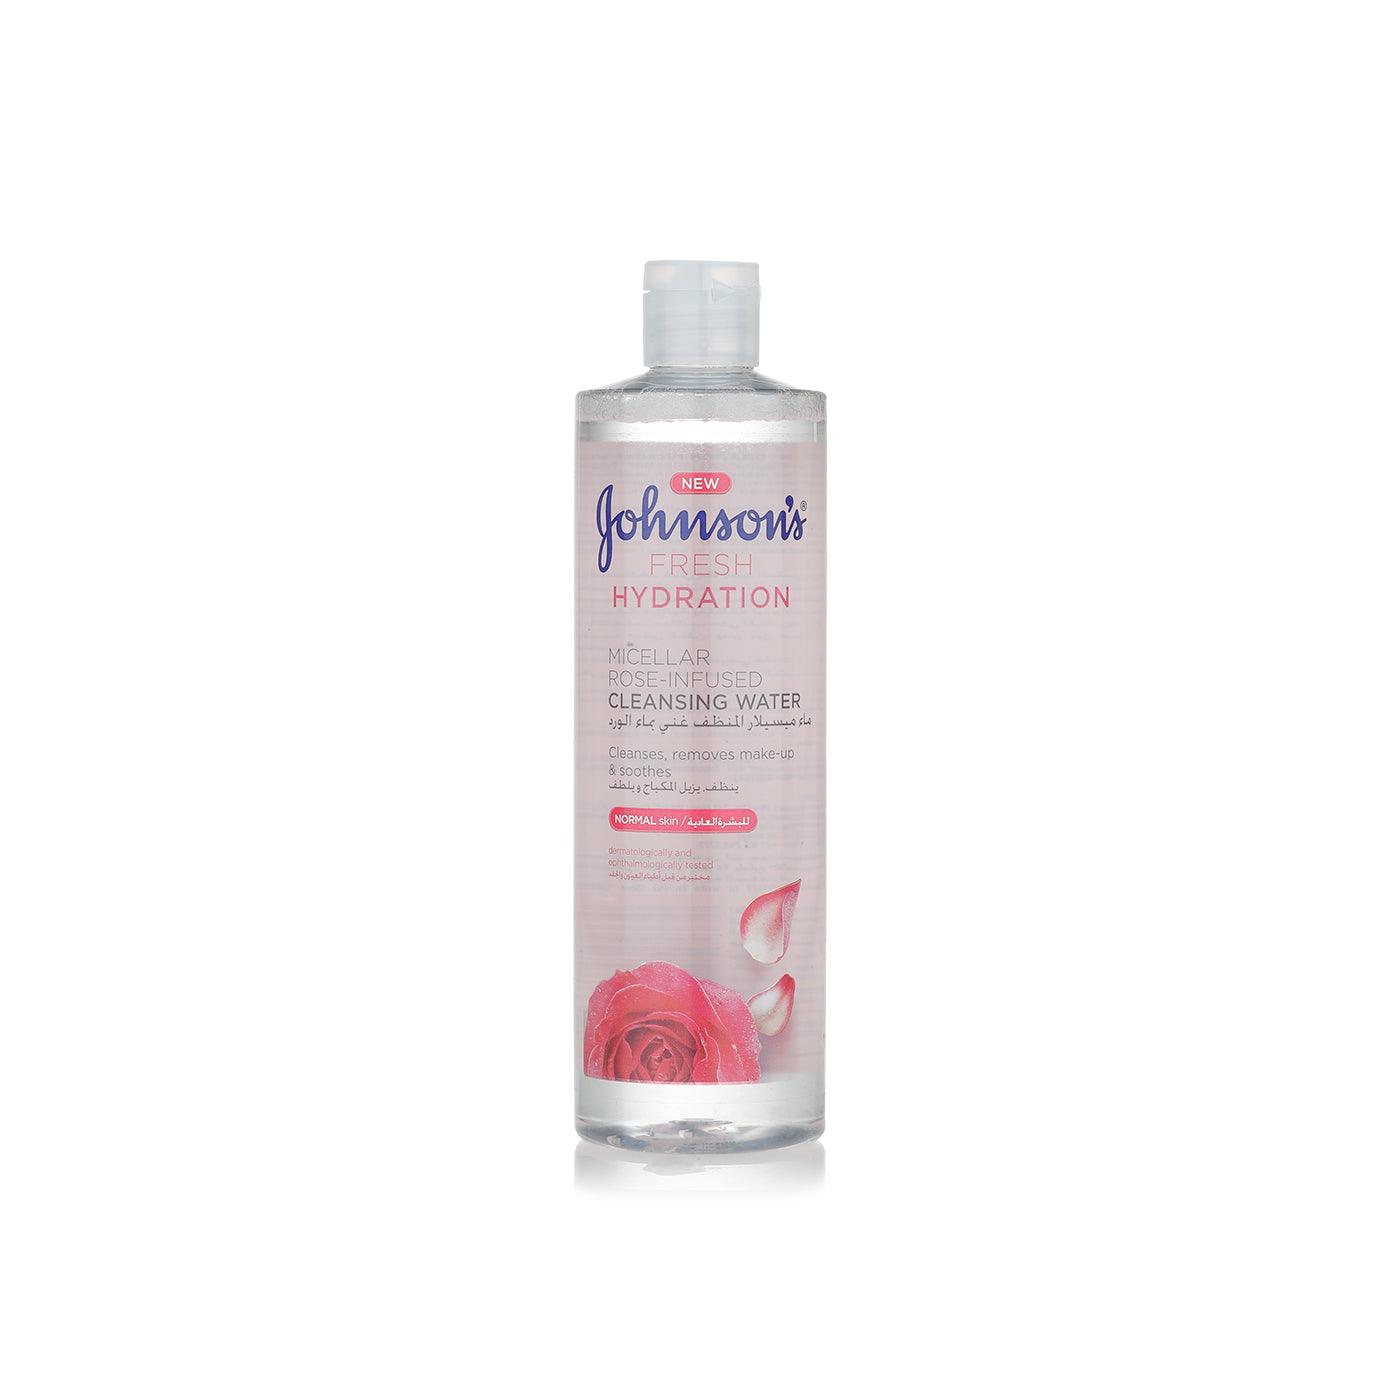 Johnson's Micellar Rose Infused Cleansing Water 400ml - Karout Online -Karout Online Shopping In lebanon - Karout Express Delivery 